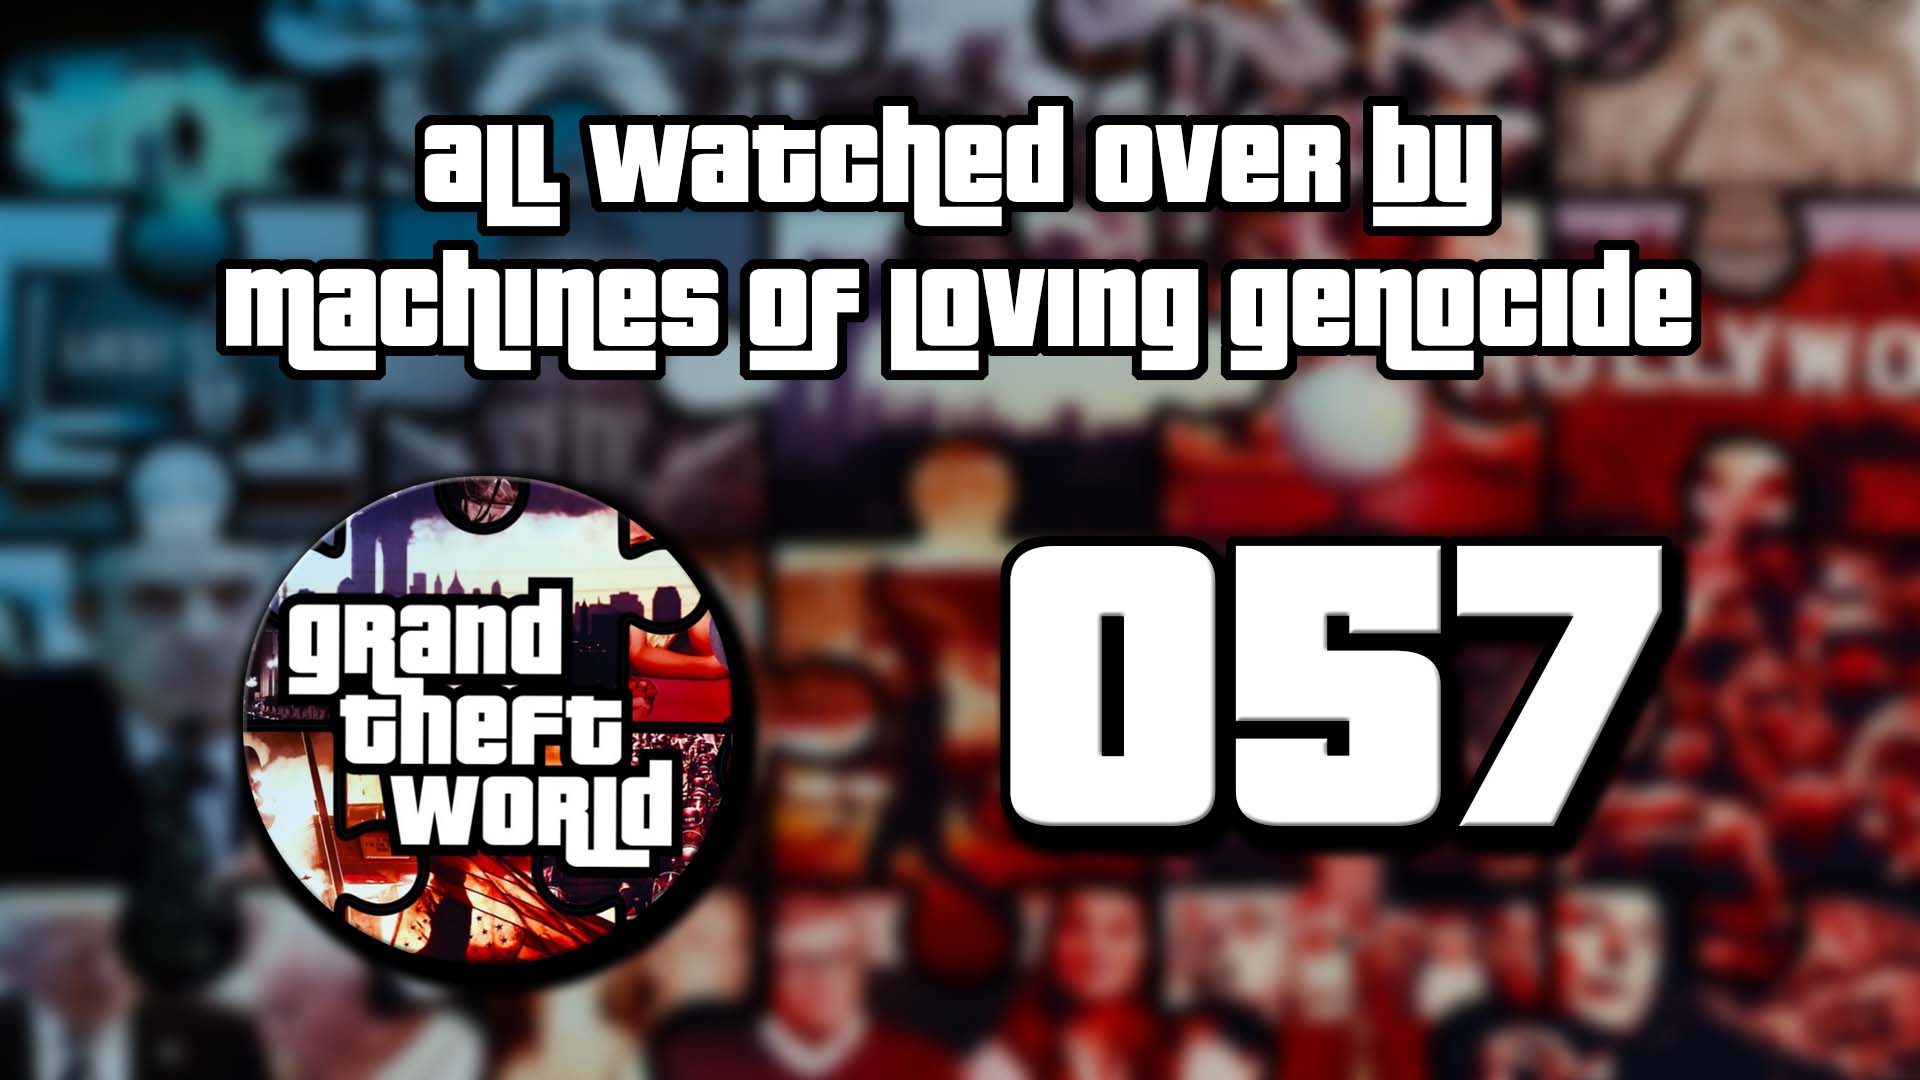 Grand Theft World Podcast 057 | All Watched Over by Machines of Loving Genocide